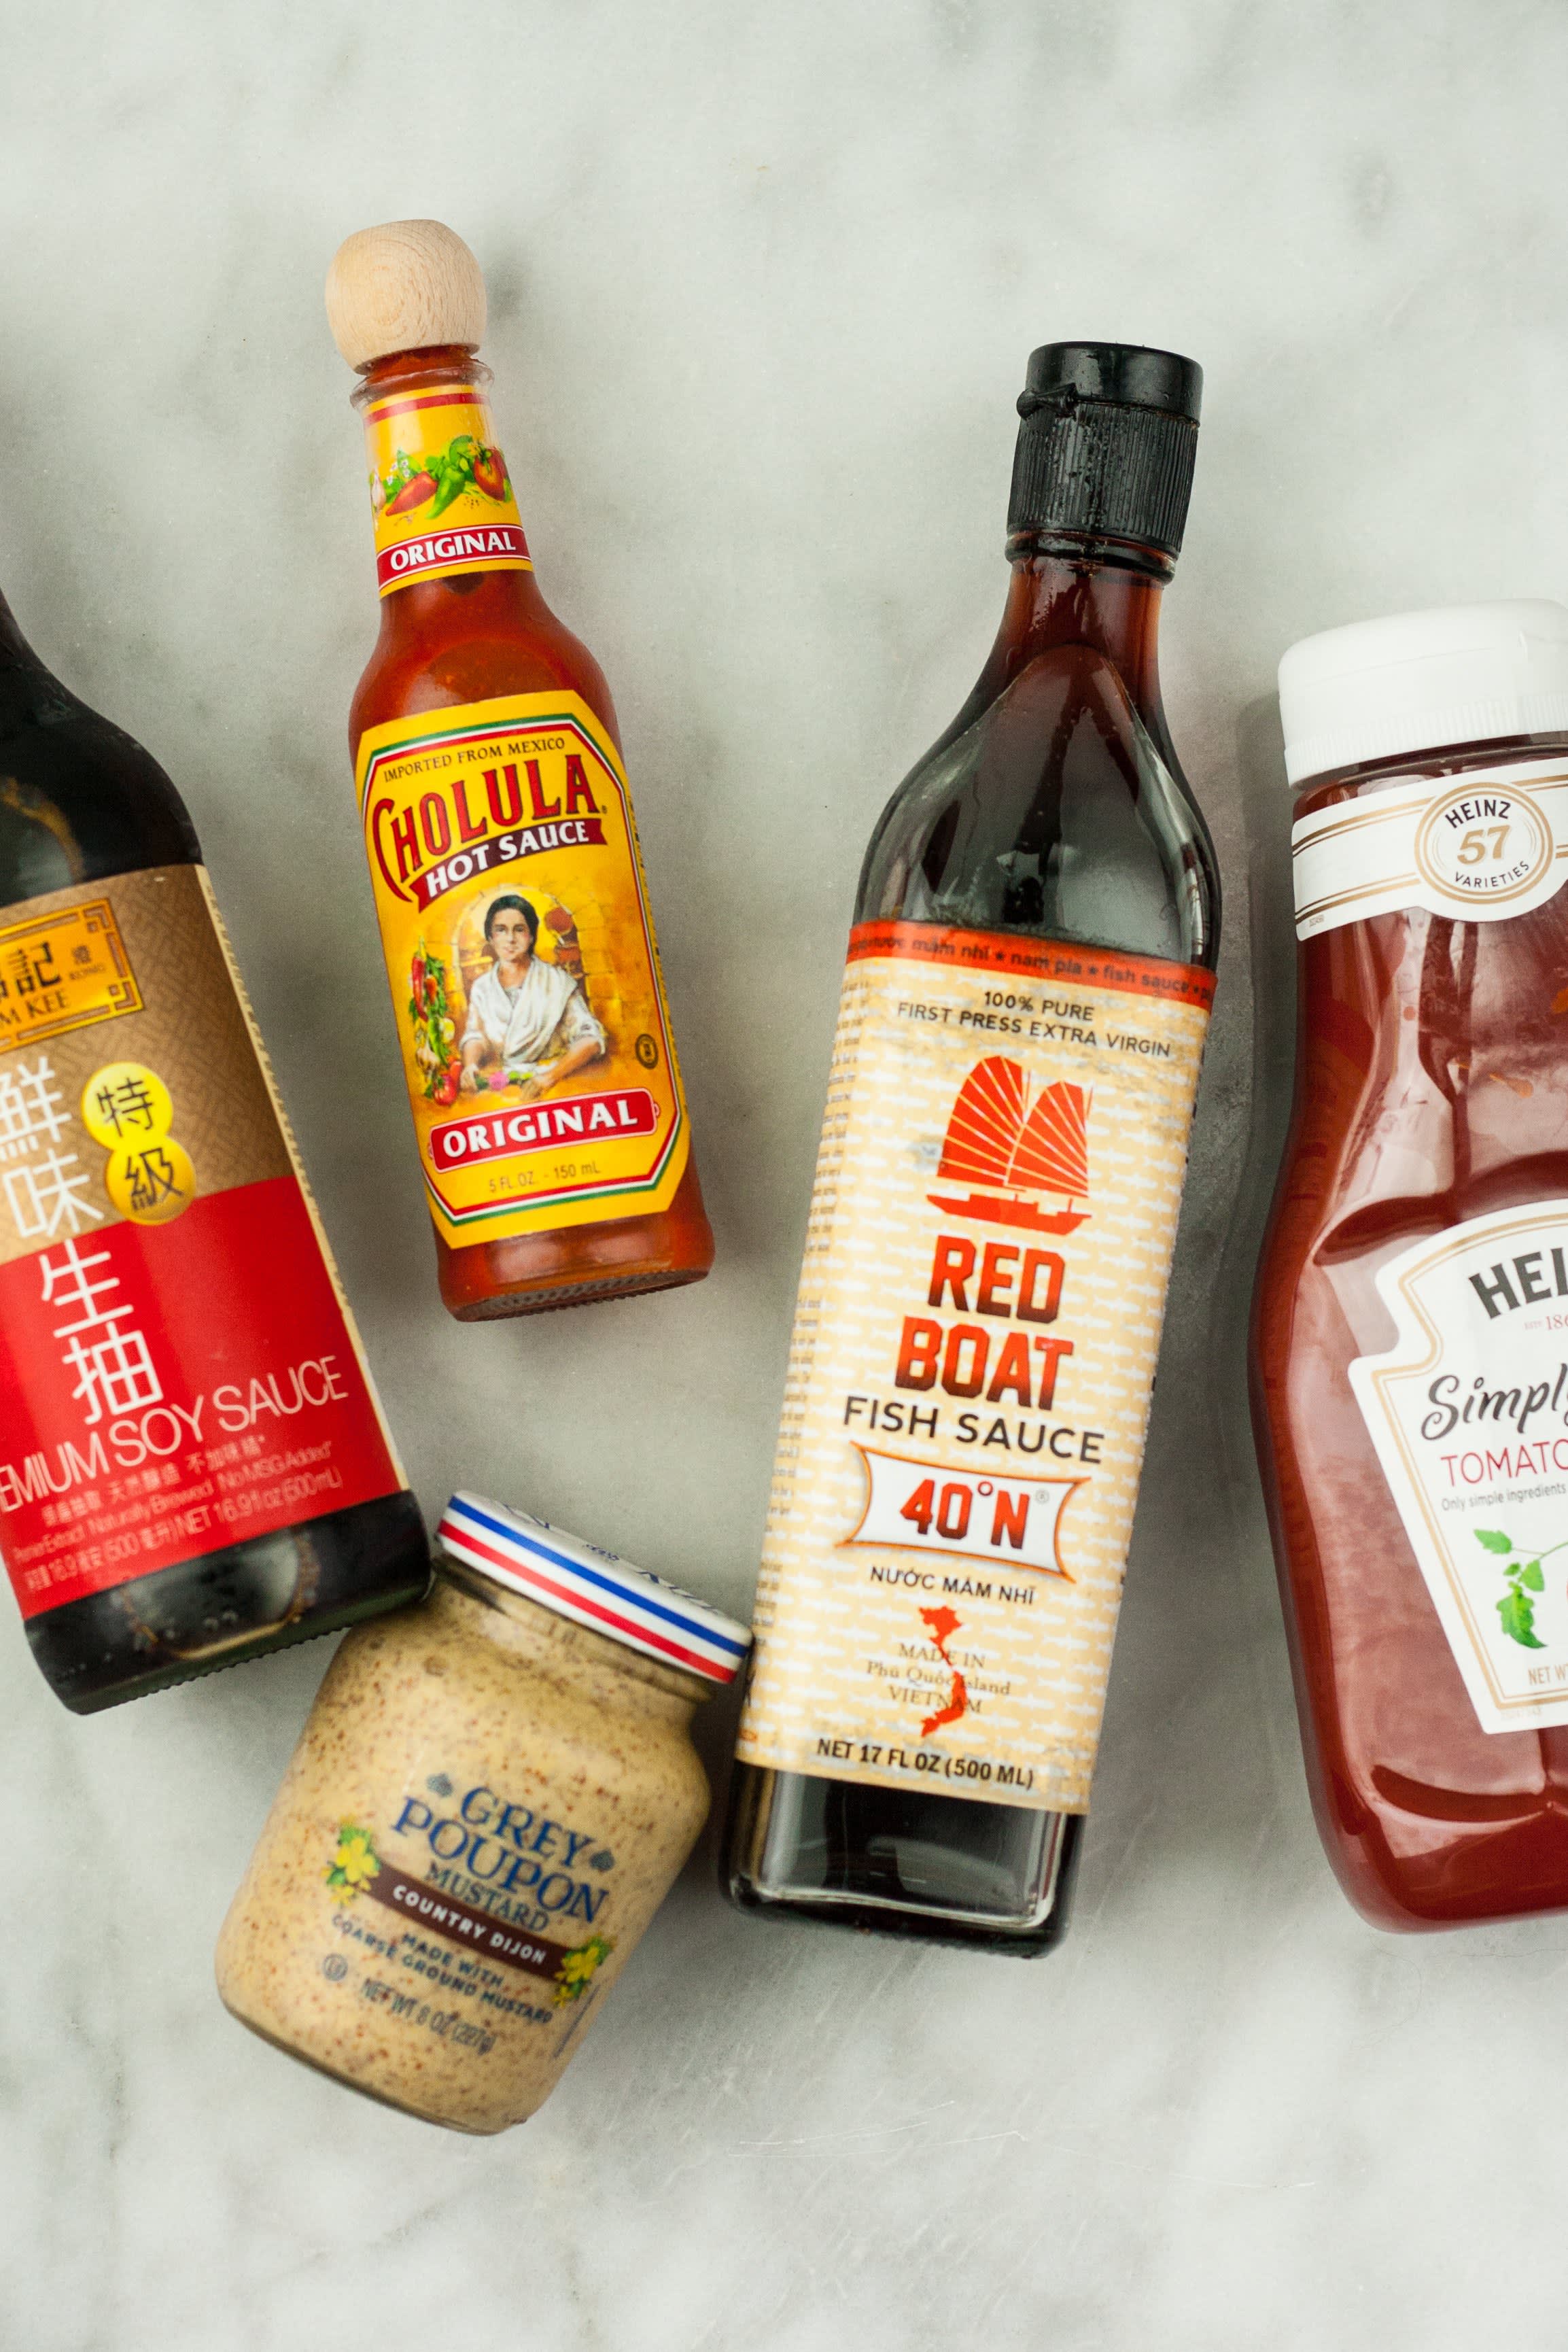 Do You Need to Refrigerate Hot Sauce?